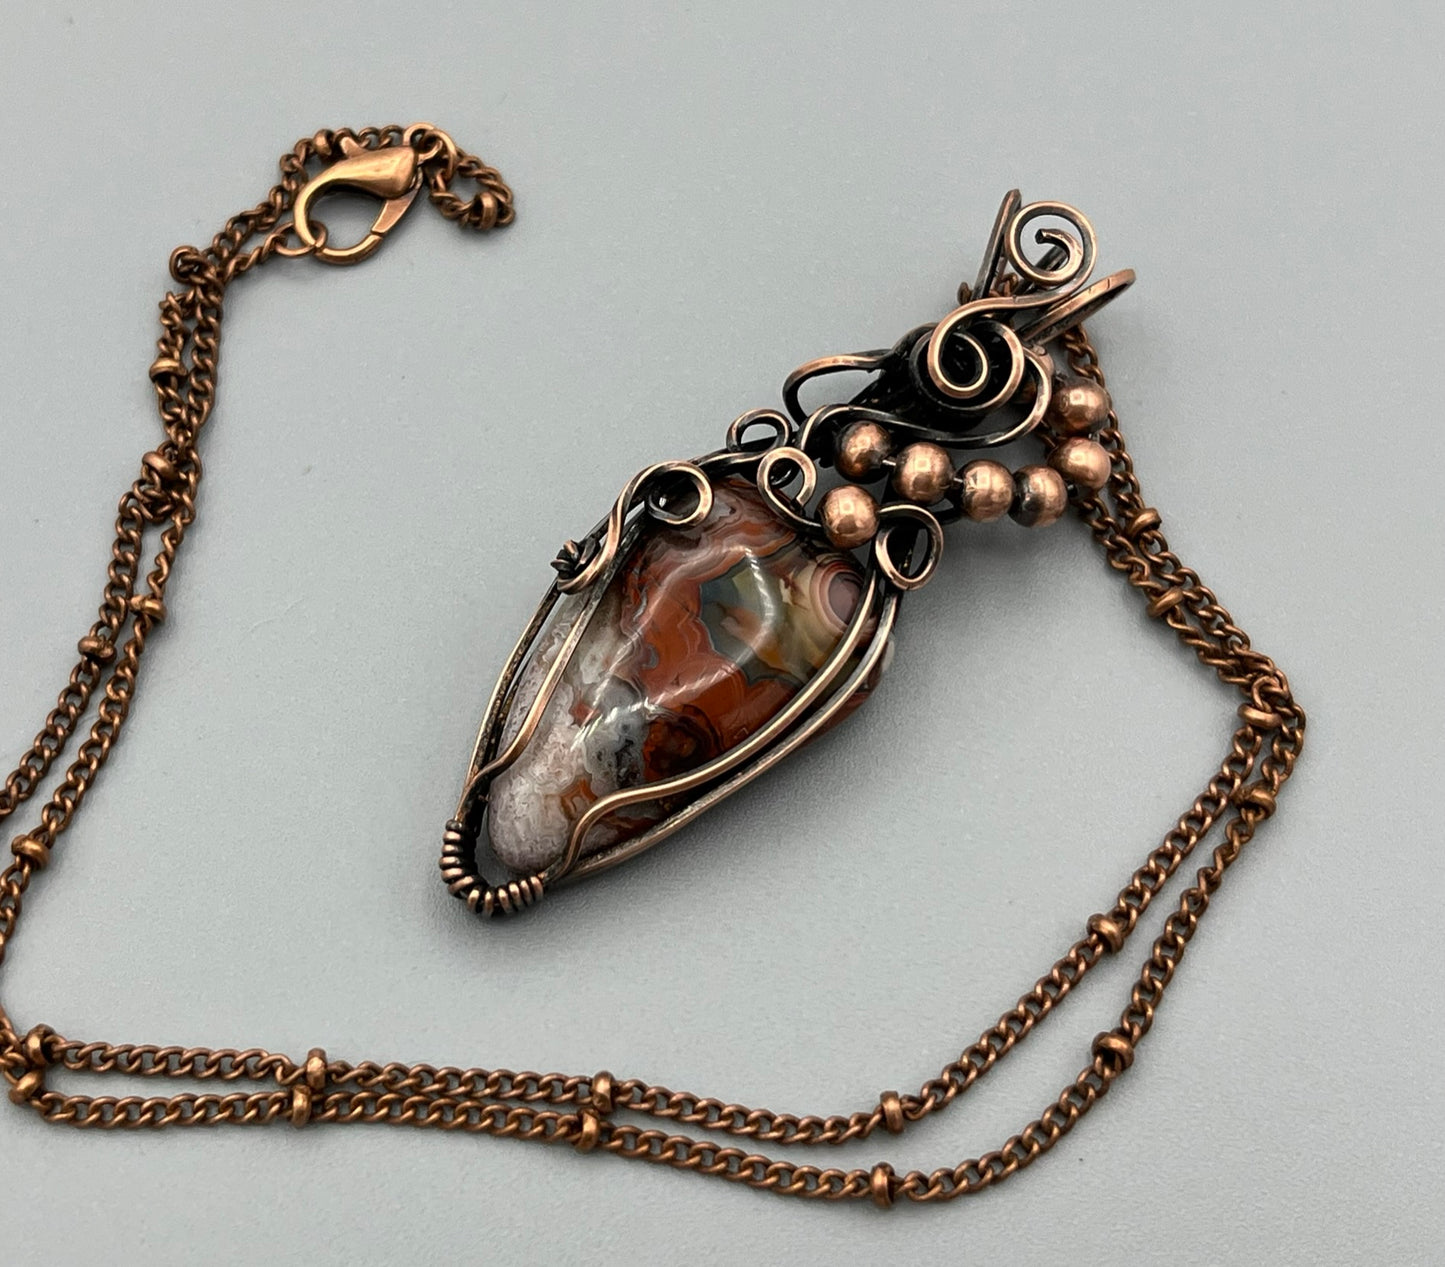 Teardrop Crazy Lace Agate Handmade Wire Wrapped Pendant